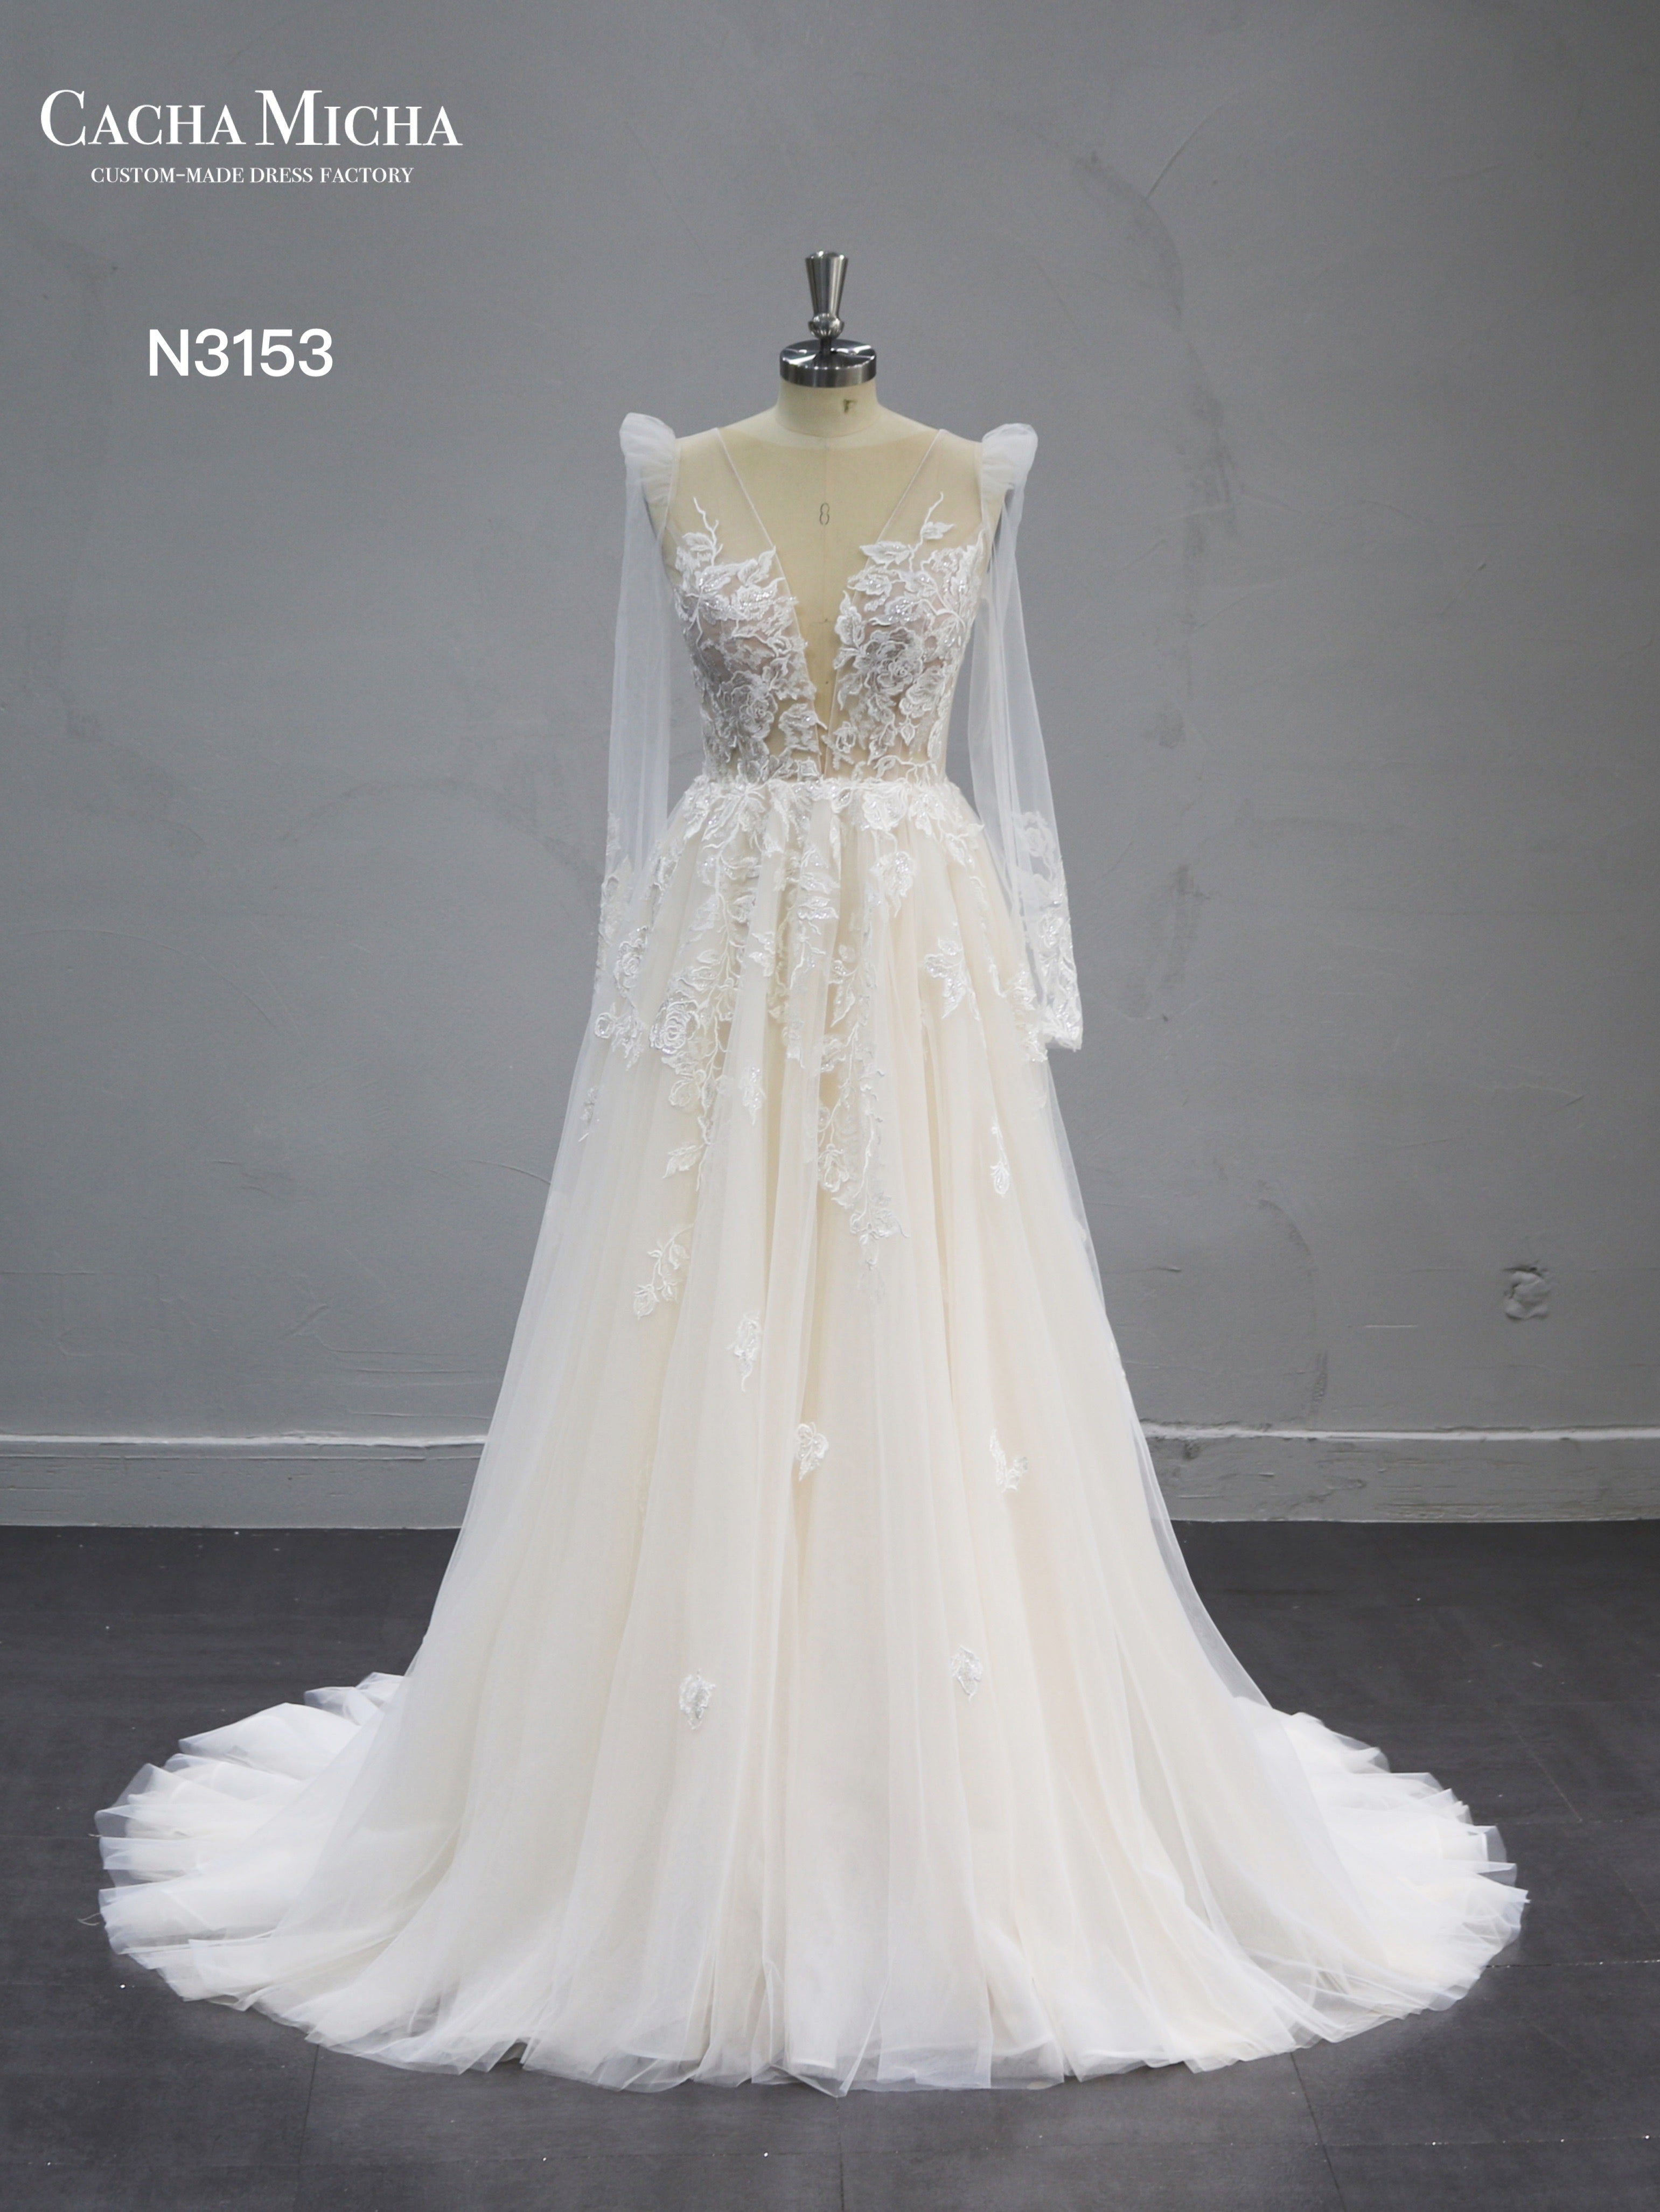 Lace Applique Long Sleeves Champagne Wedding Dress N3153